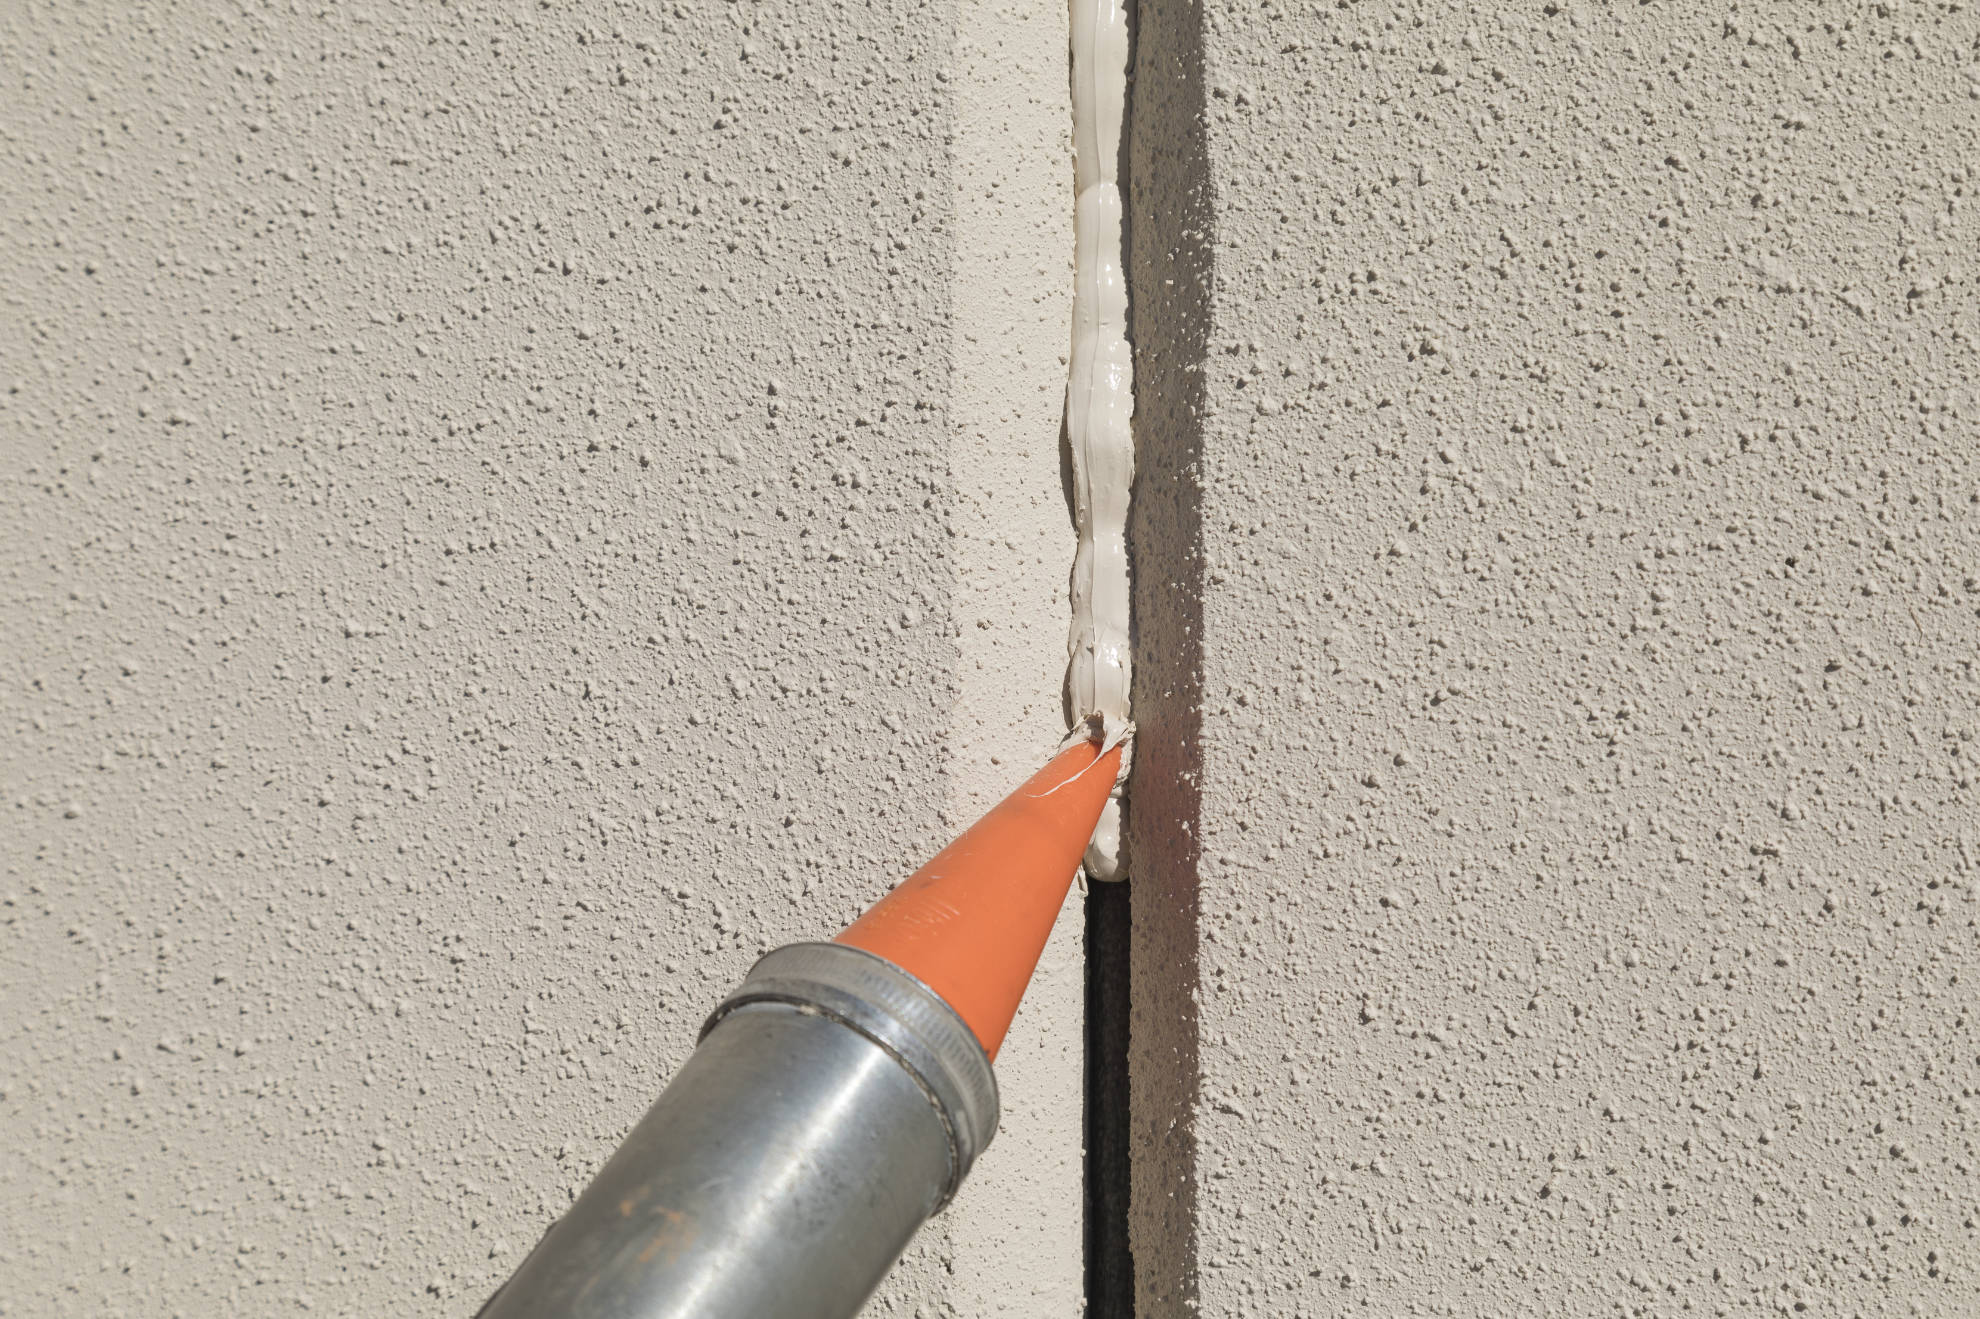 Image of caulk being applied.